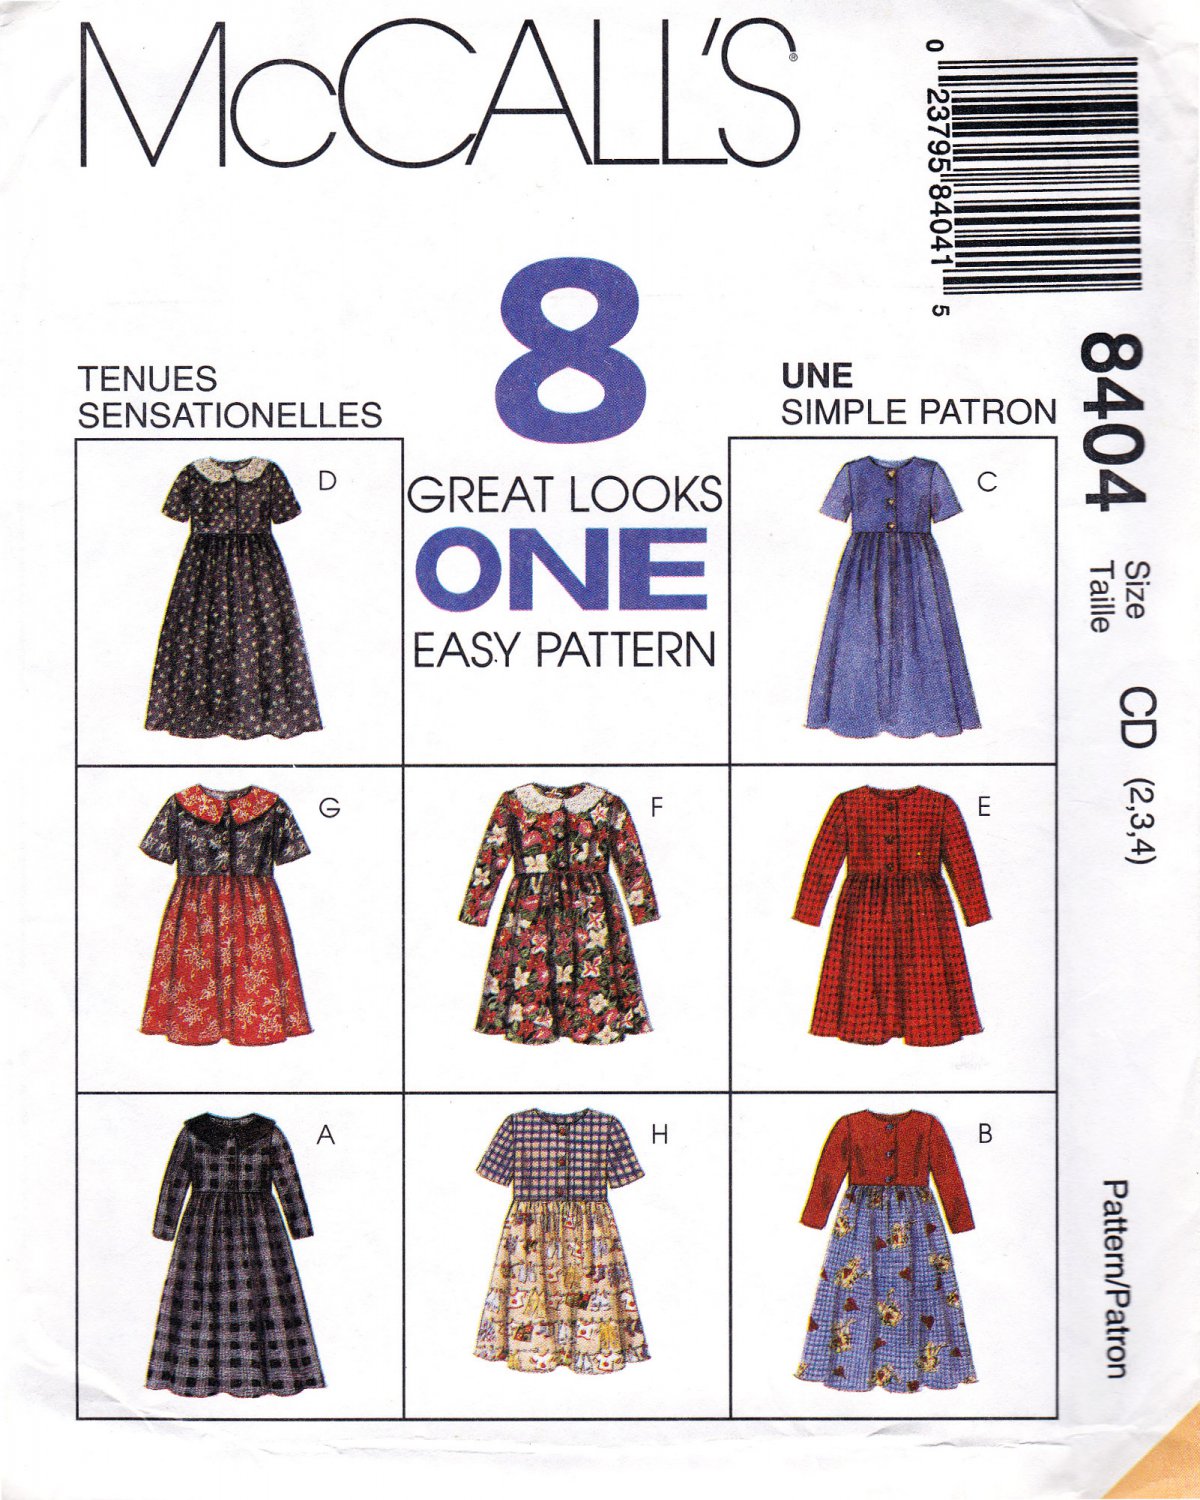 McCall's 8404 M8404 Girls Sewing Pattern Childrens Dresses 8 Looks Kids Sizes 2-3-4